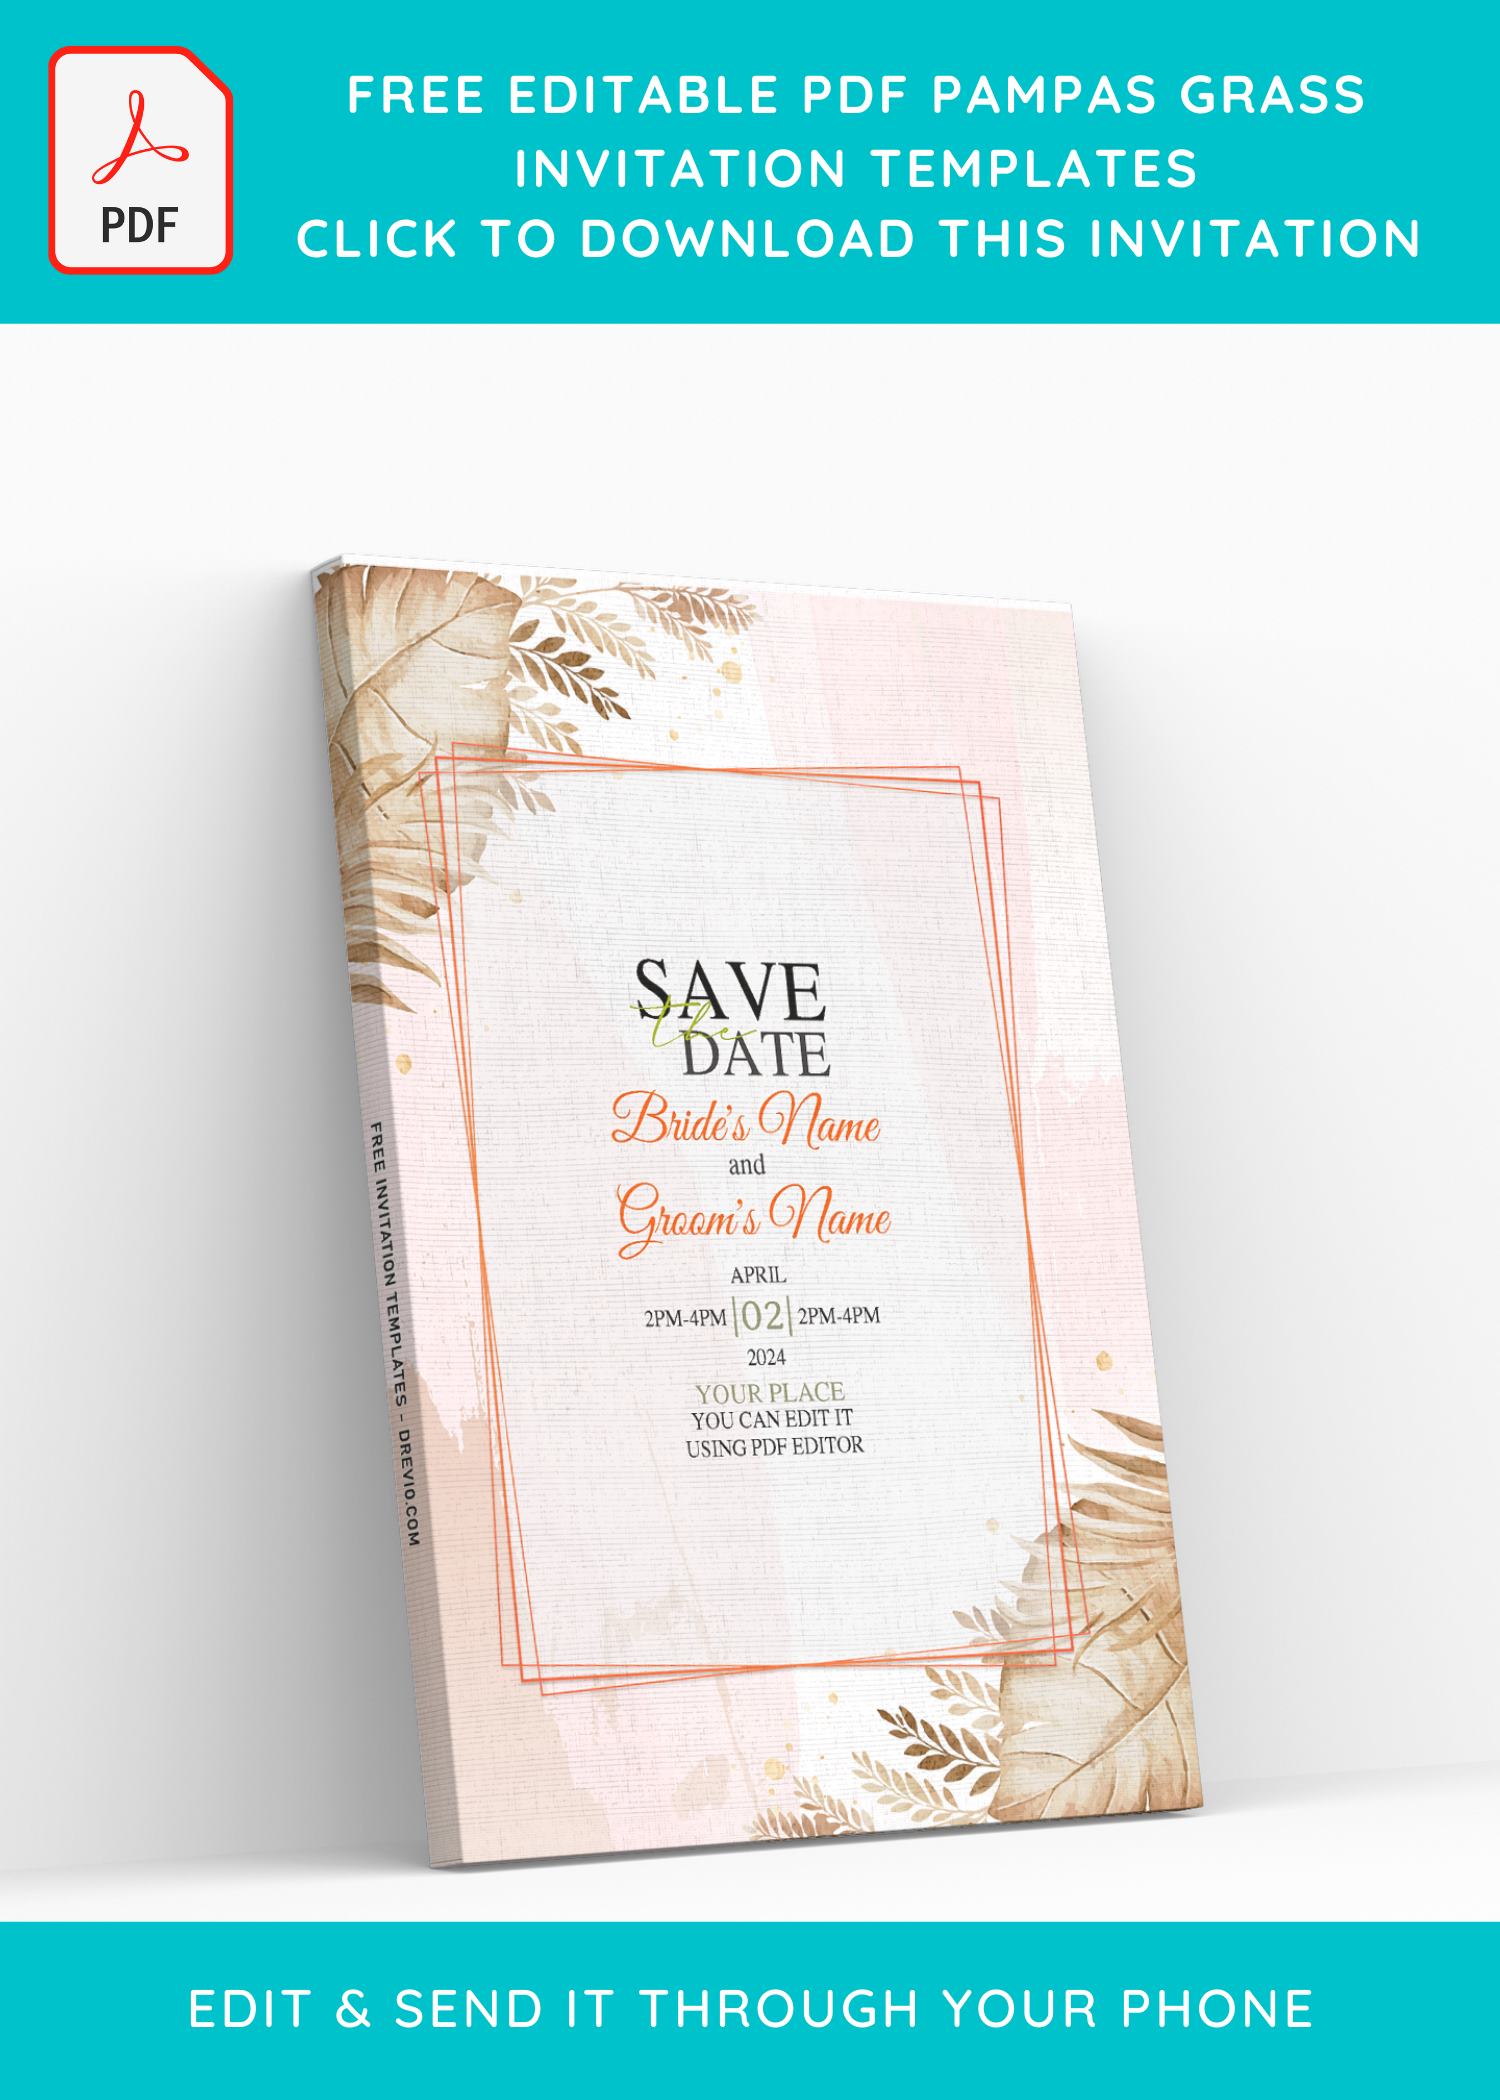 Free Editable PDF) Enchanted Pampas Save The Date Invitation Templates |  Download Hundreds FREE PRINTABLE Birthday Invitation Templates